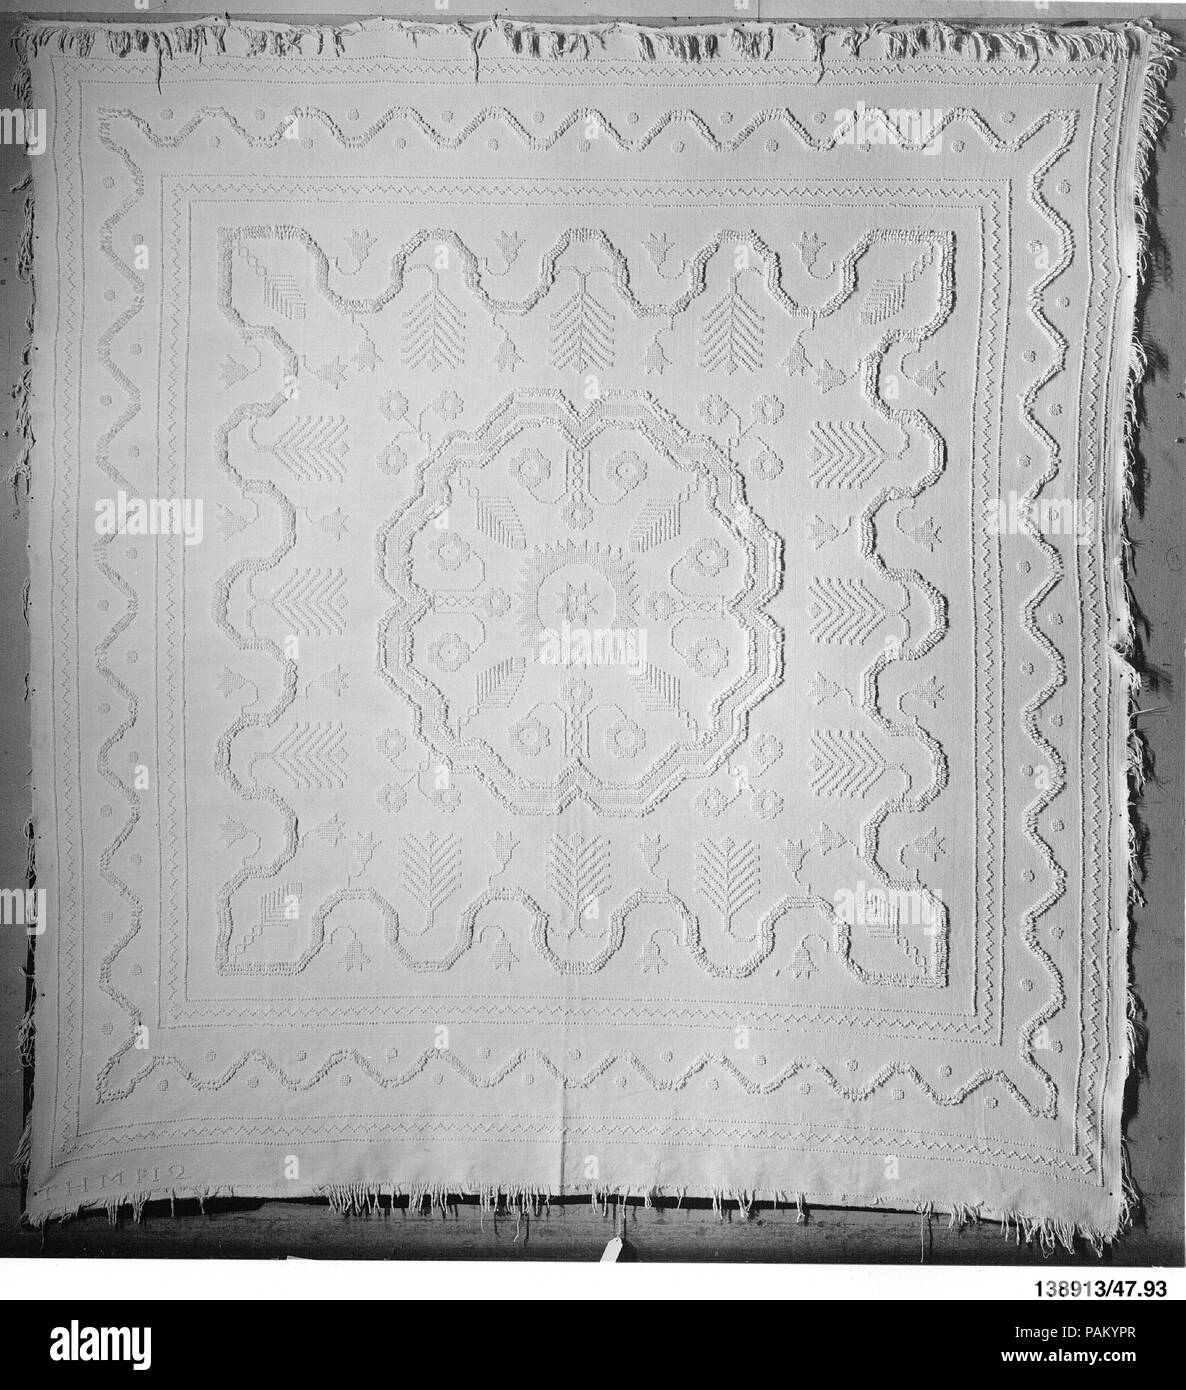 Counterpane, Bolton type. Culture: British, probably. Dimensions: 109 1/4 x 102 3/4 in. (277.5 x 261 cm). Date: ca. 1800-1830.  This hand-loom-woven white cotton bed cover was made in one piece. The design is picked out in raised loops of heavy cotton weft threads. The heavy pattern wefts are in a 1:z proportion to the lighter-weight main wefts. The small central eight-pointed star is surrounded by various borders. The piece is self-fringed on all four sides. Museum: Metropolitan Museum of Art, New York, USA. Stock Photo